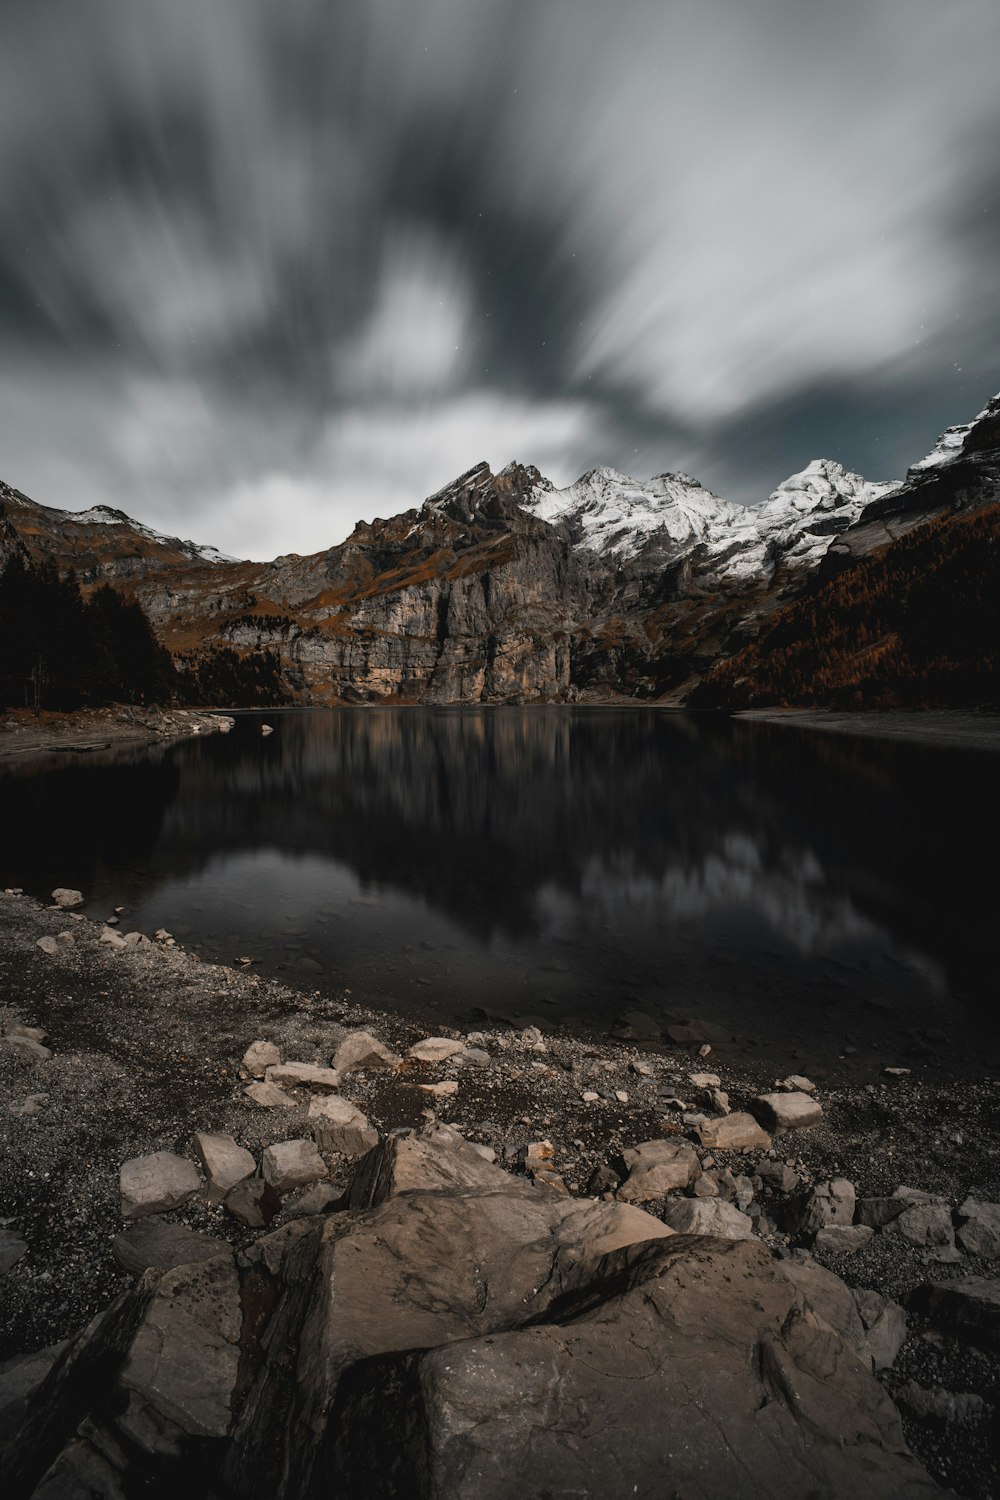 a mountain lake surrounded by rocks under a cloudy sky